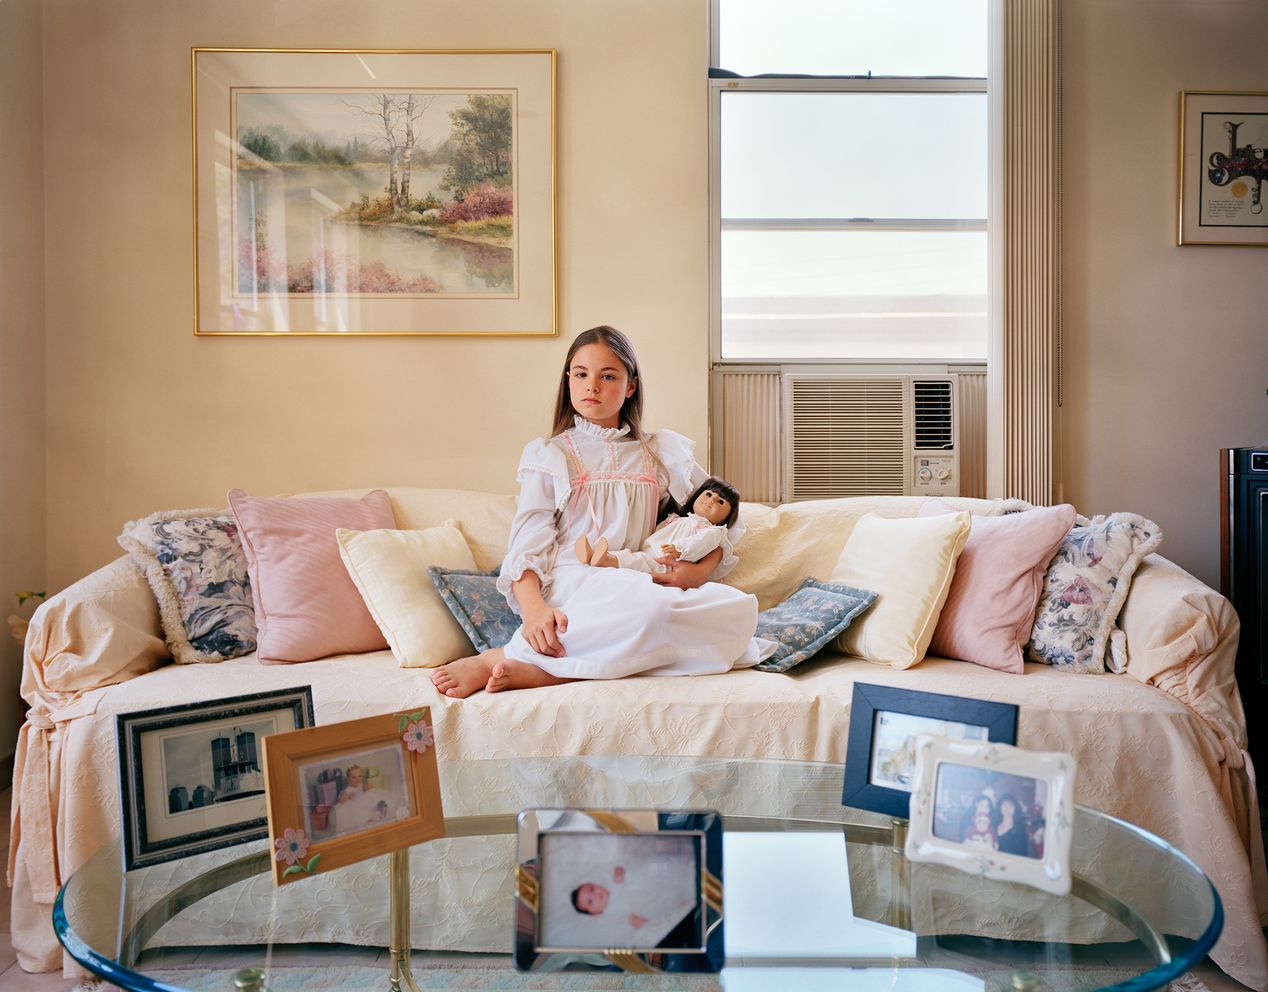 Young girl and her lookalike girl sitting in a bright living room, environmental portrait photography, Ilona Szwarc, contemporary Los Angeles artist.